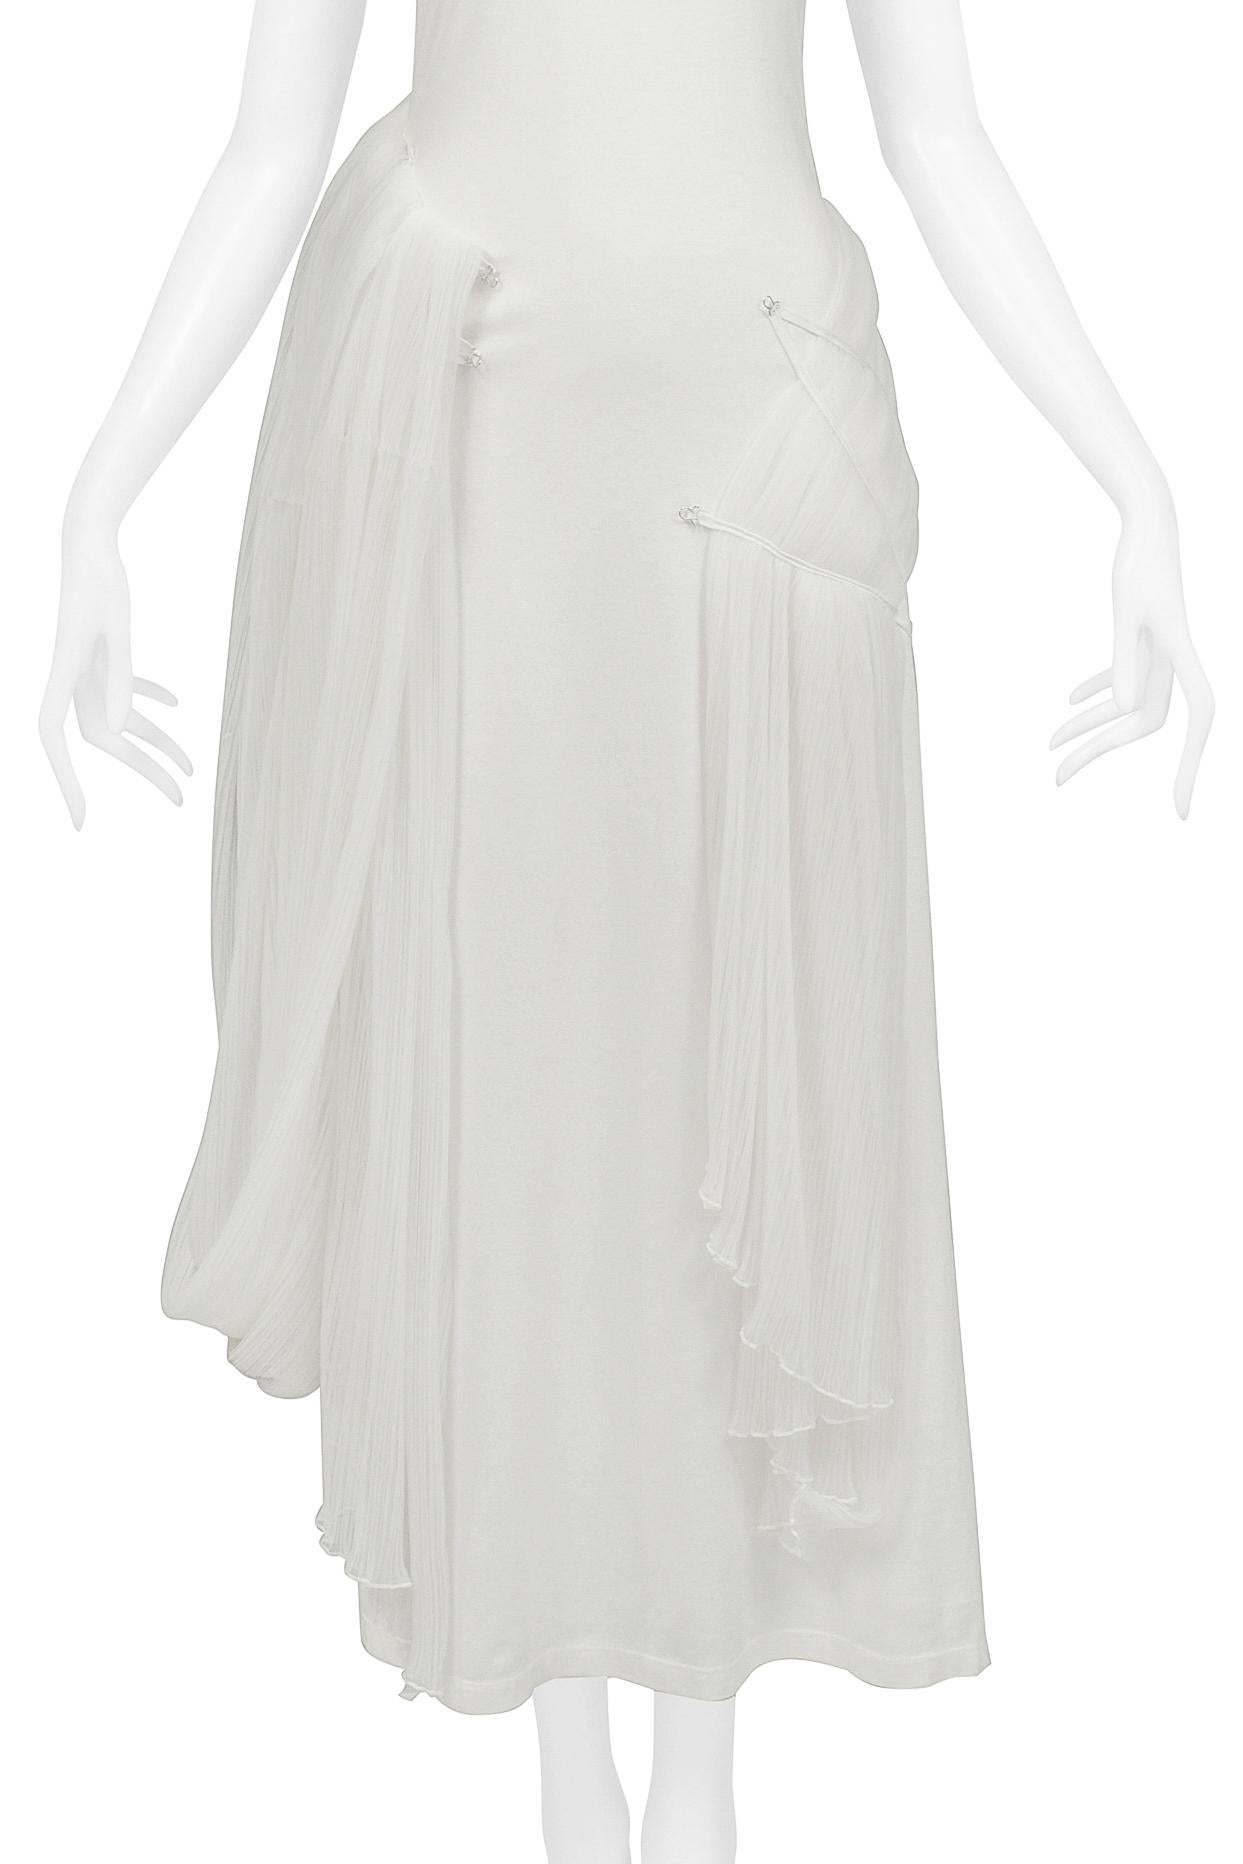 Issey Miyake Iconic White Goddess Concept Dress 2003 For Sale 2